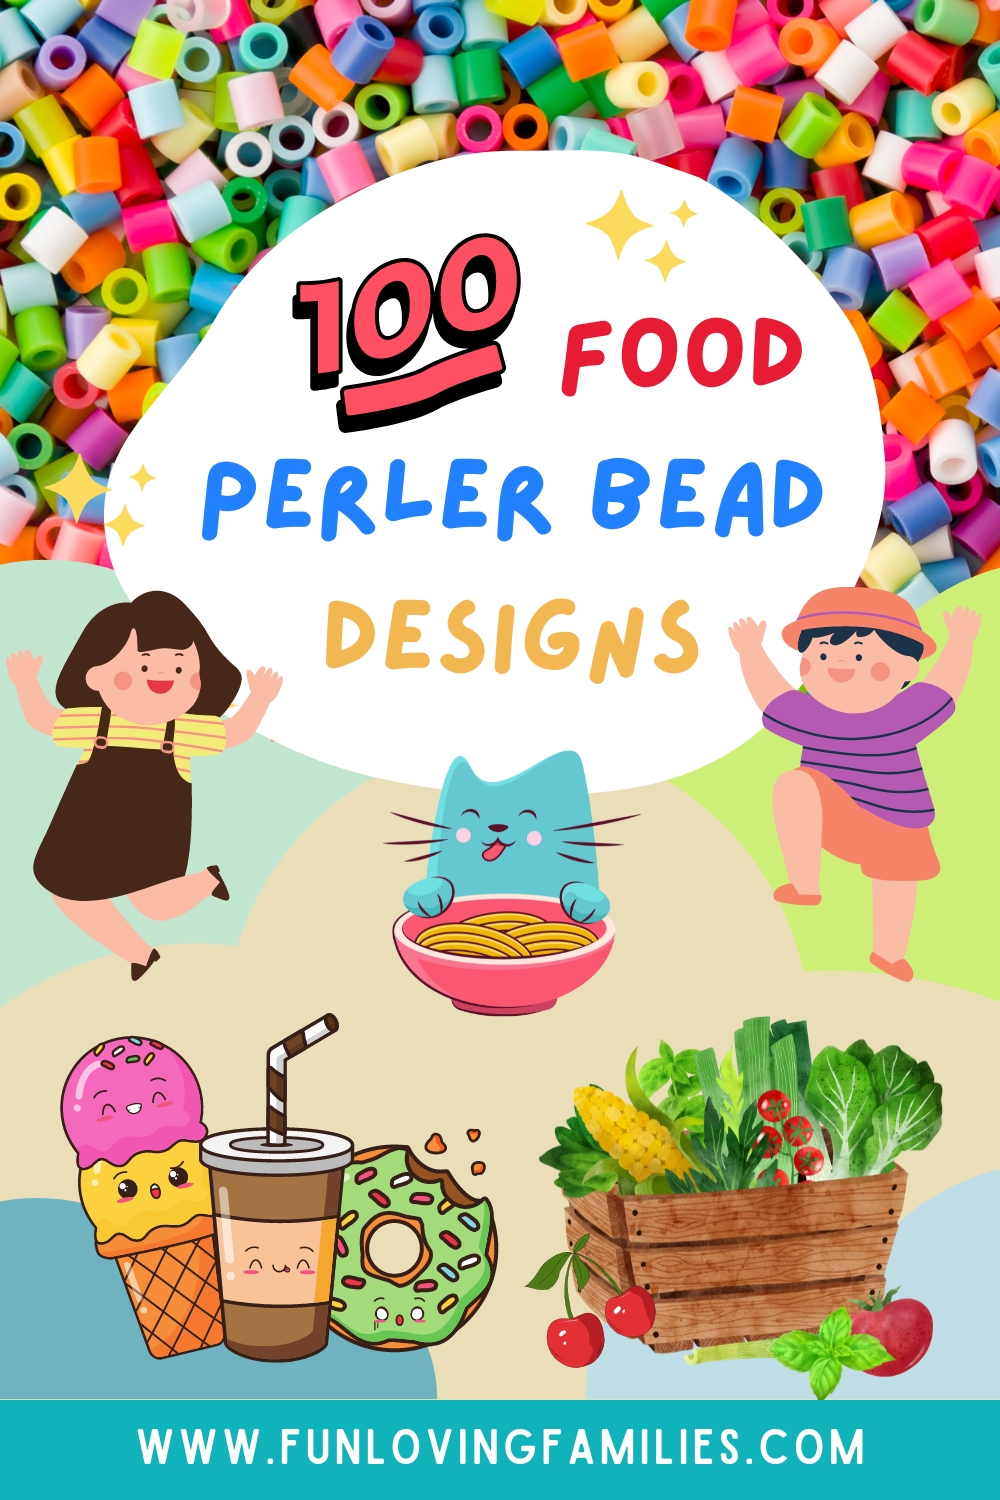 100 Food Perler Bead Patterns, Designs and Ideas pin image